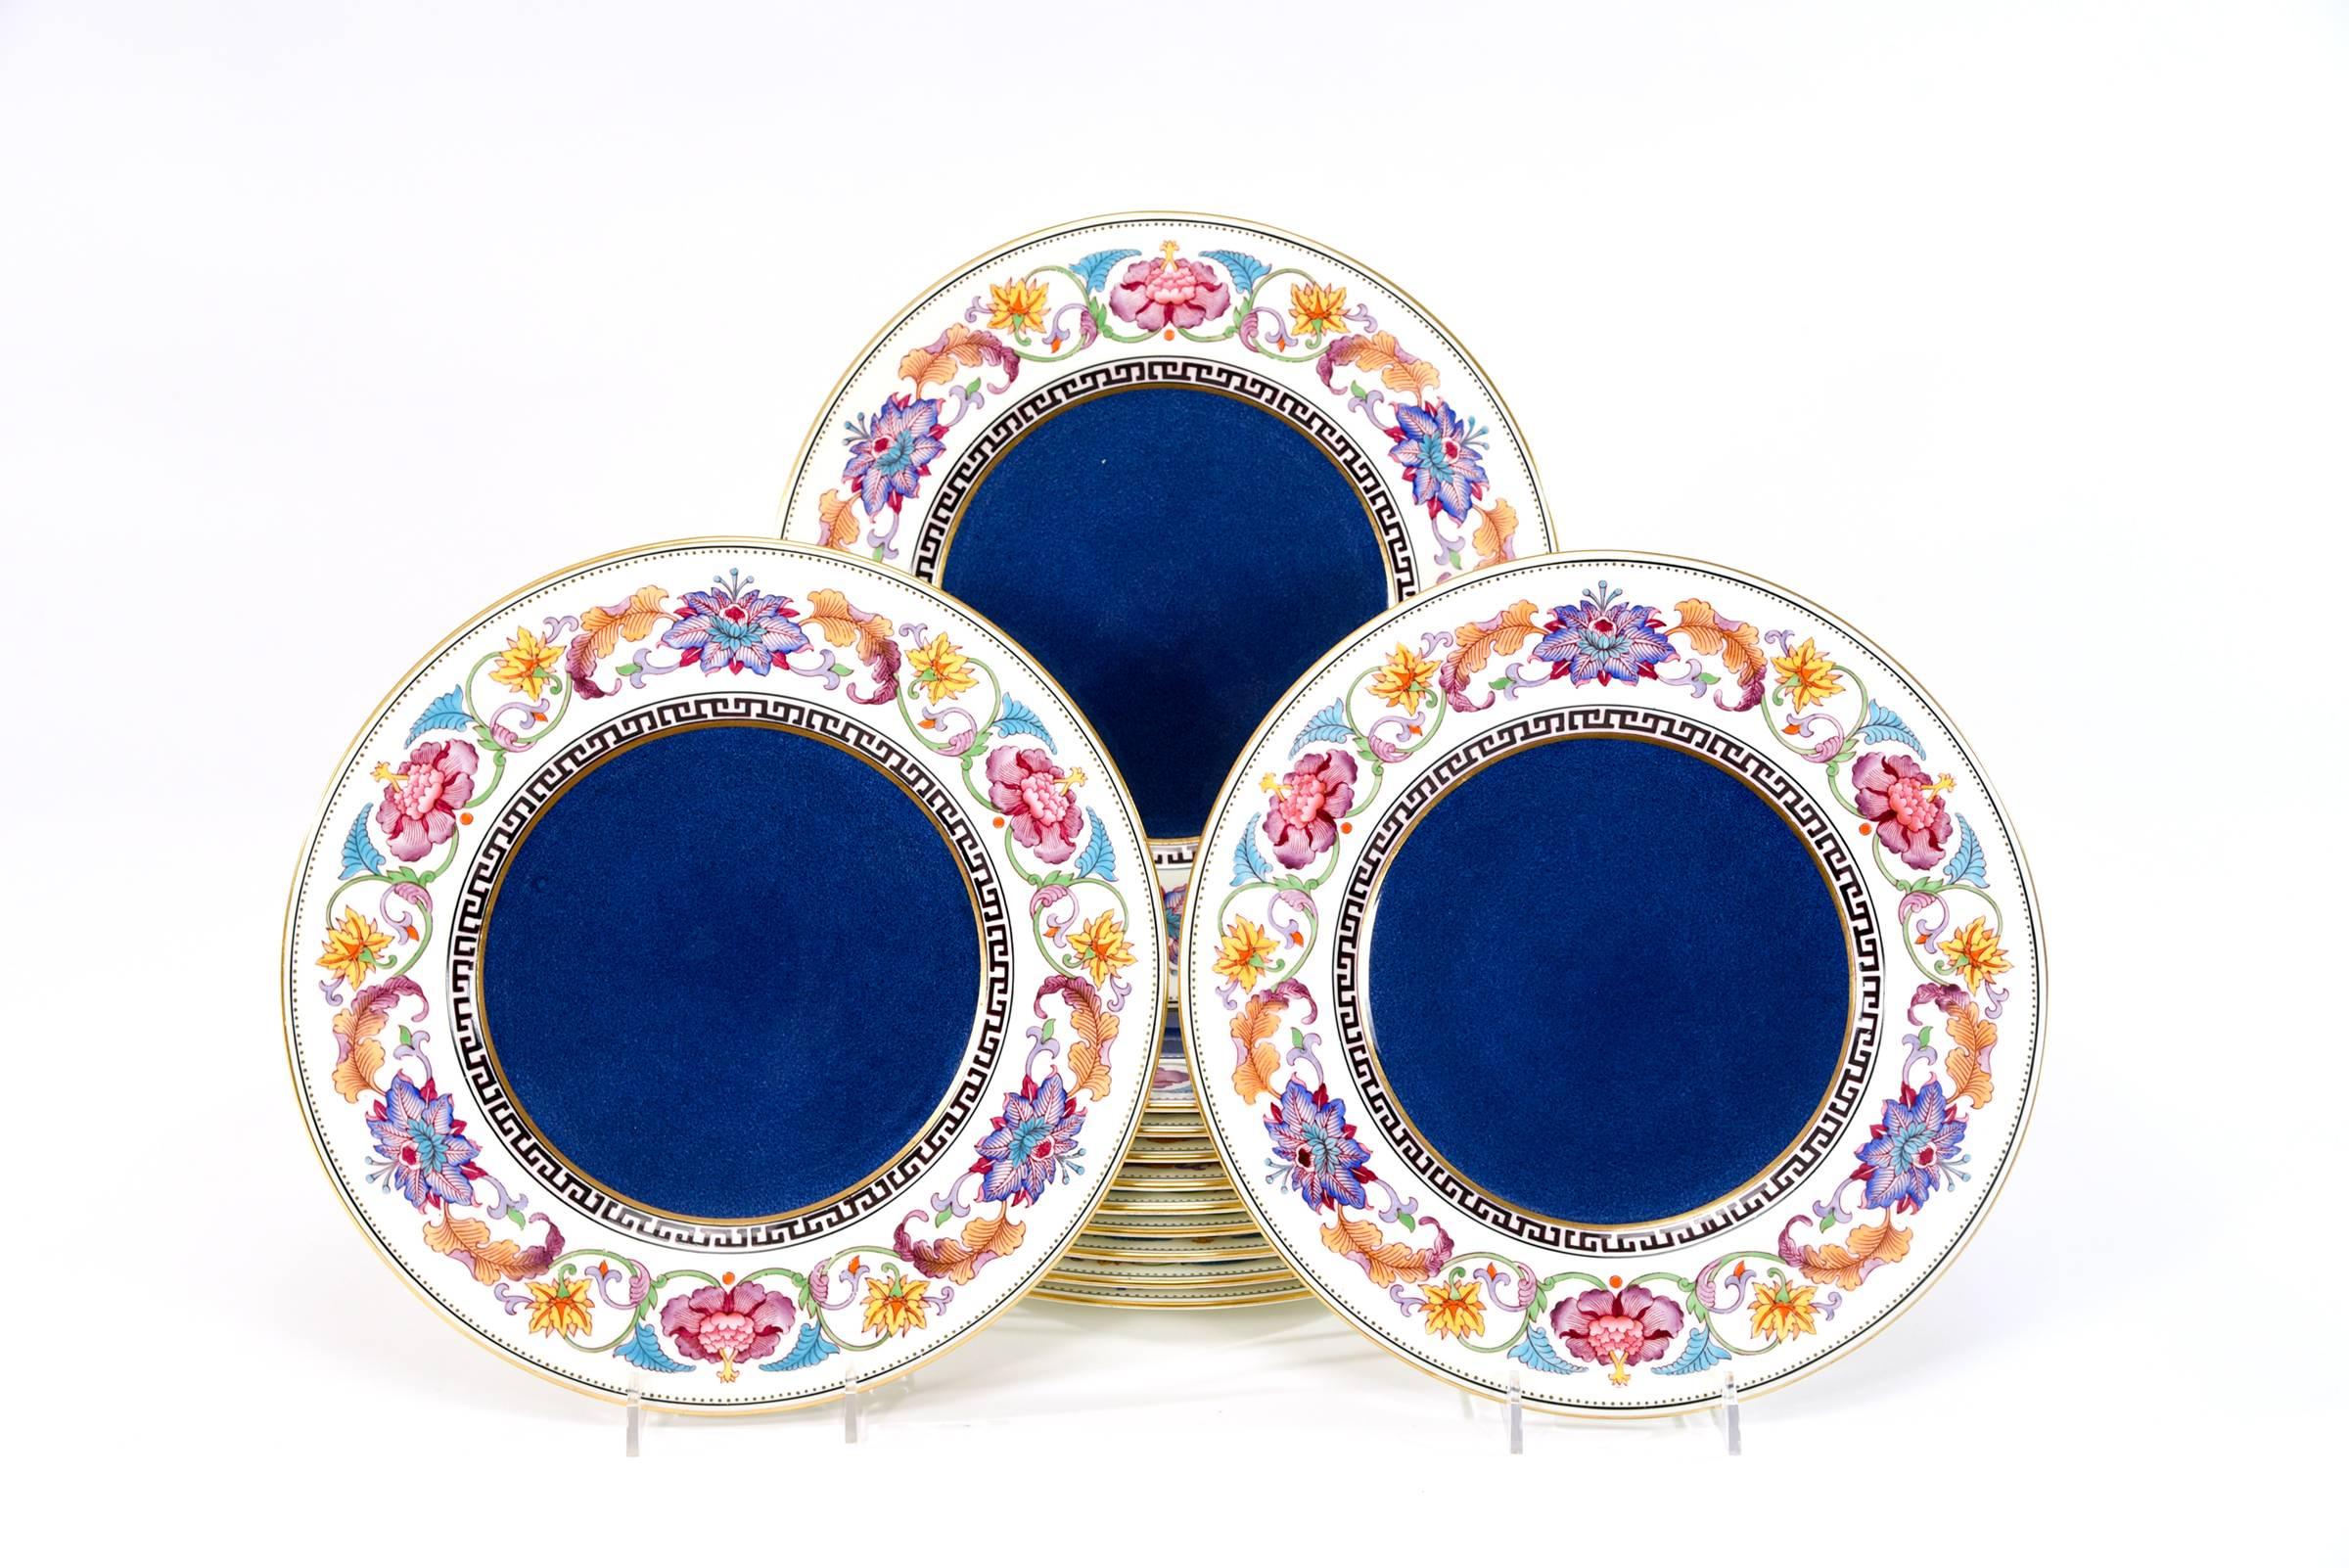 This is an unusual set of 12 Wedgwood lapis lazuli powder blue ground dinner plates with a polychrome Aesthetic Movement style enameled border. The beautiful combination of colors on the white border creates a dramatic contrast to the blue centers